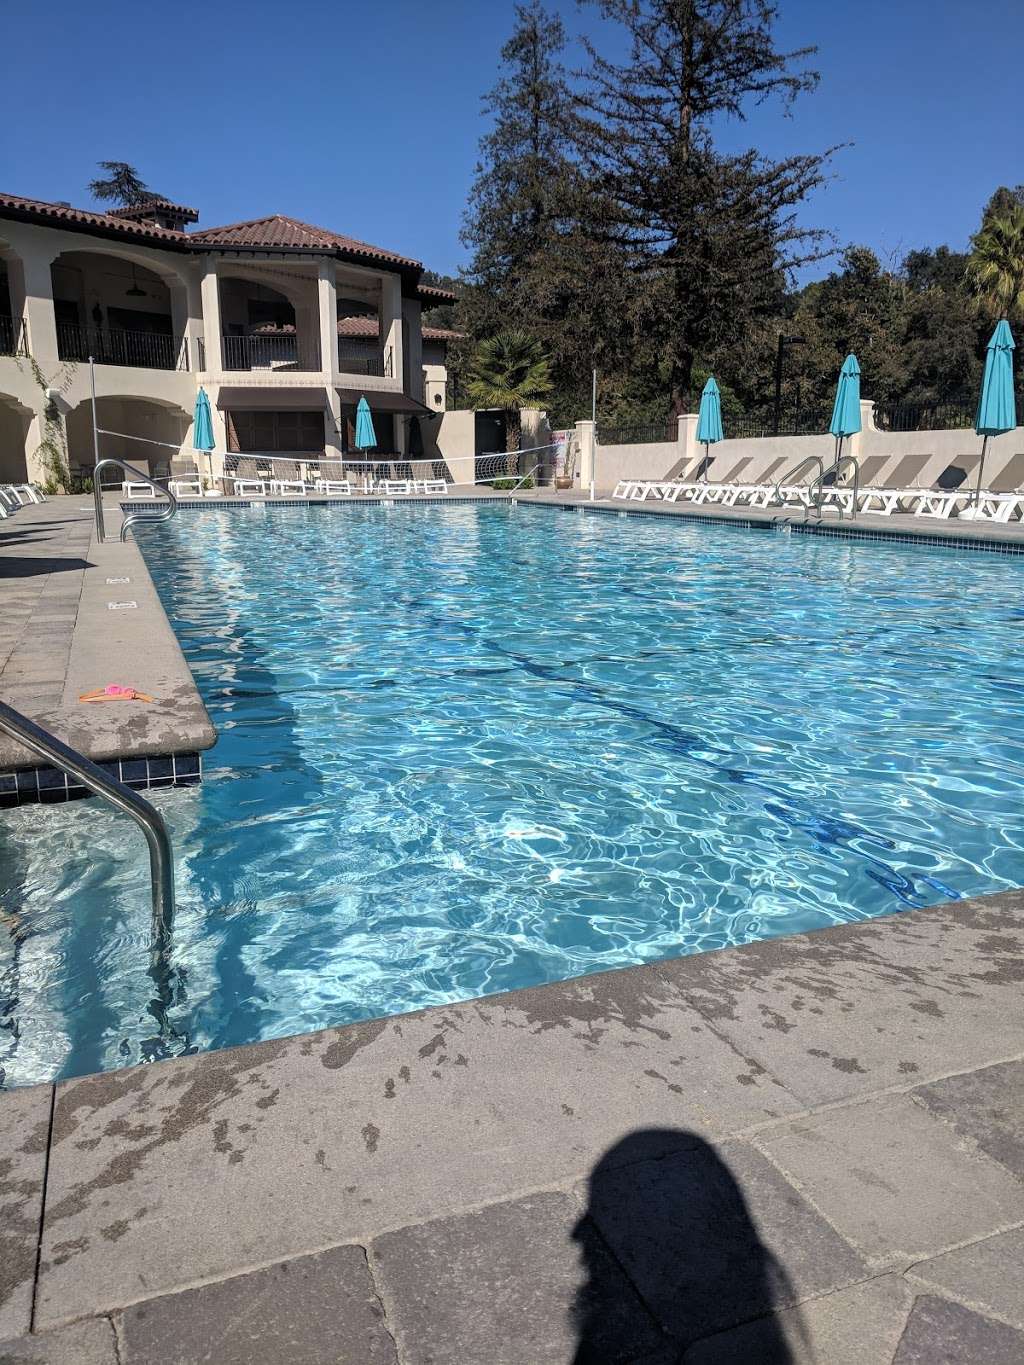 Chevy Chase Country Club | 3067 E Chevy Chase Dr, Glendale, CA 91206 | Phone: (818) 246-5566